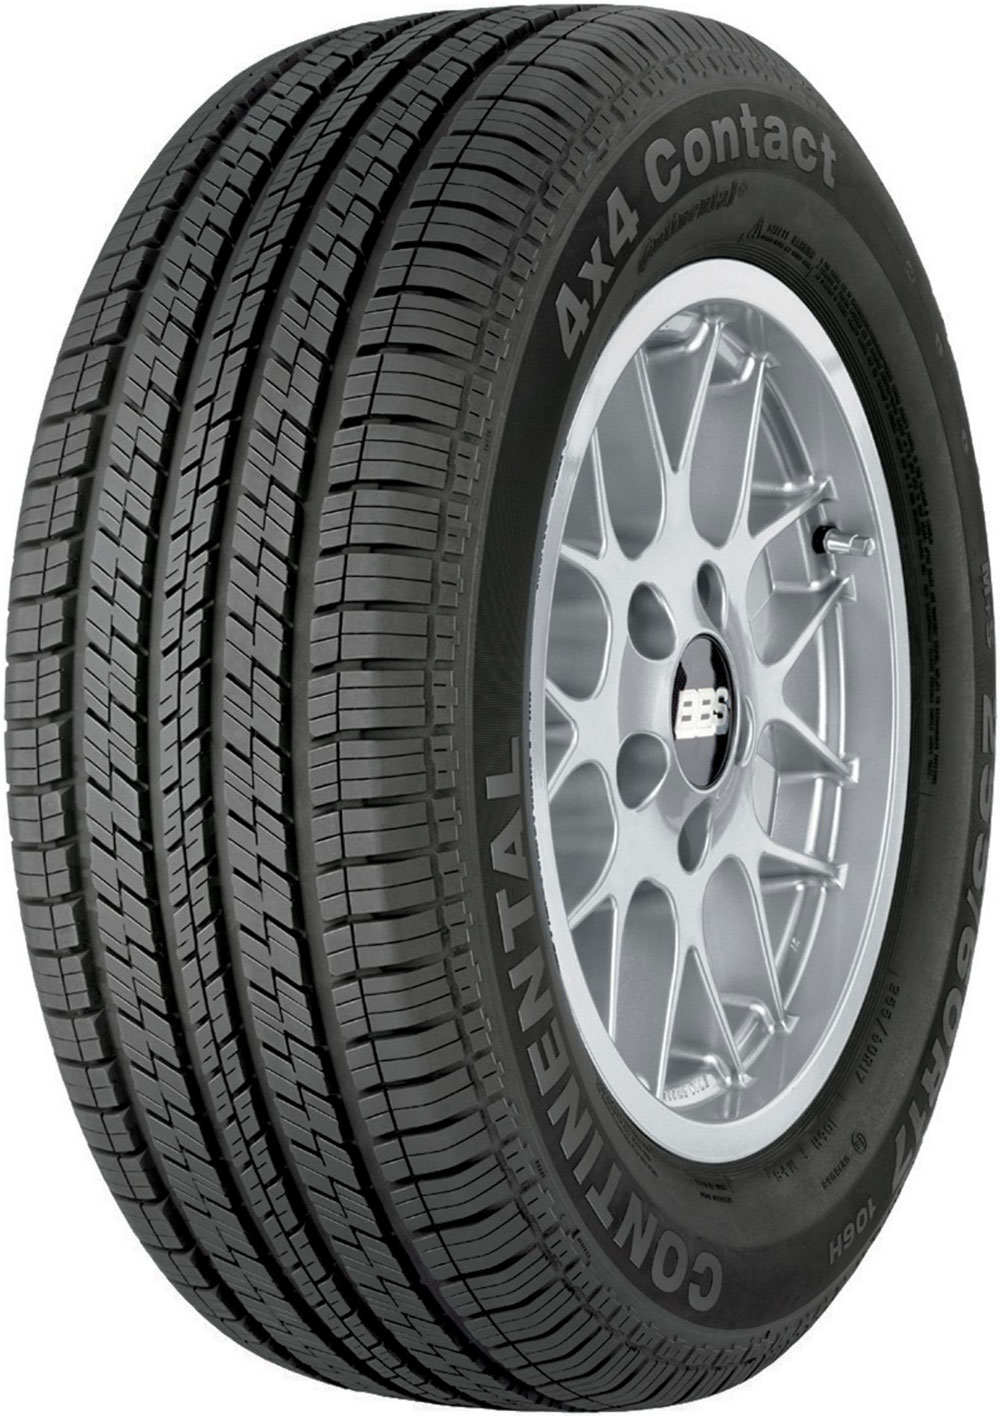 Anvelope auto CONTINENTAL Conti 4x4 Contact MERCEDES 235/60 R17 102